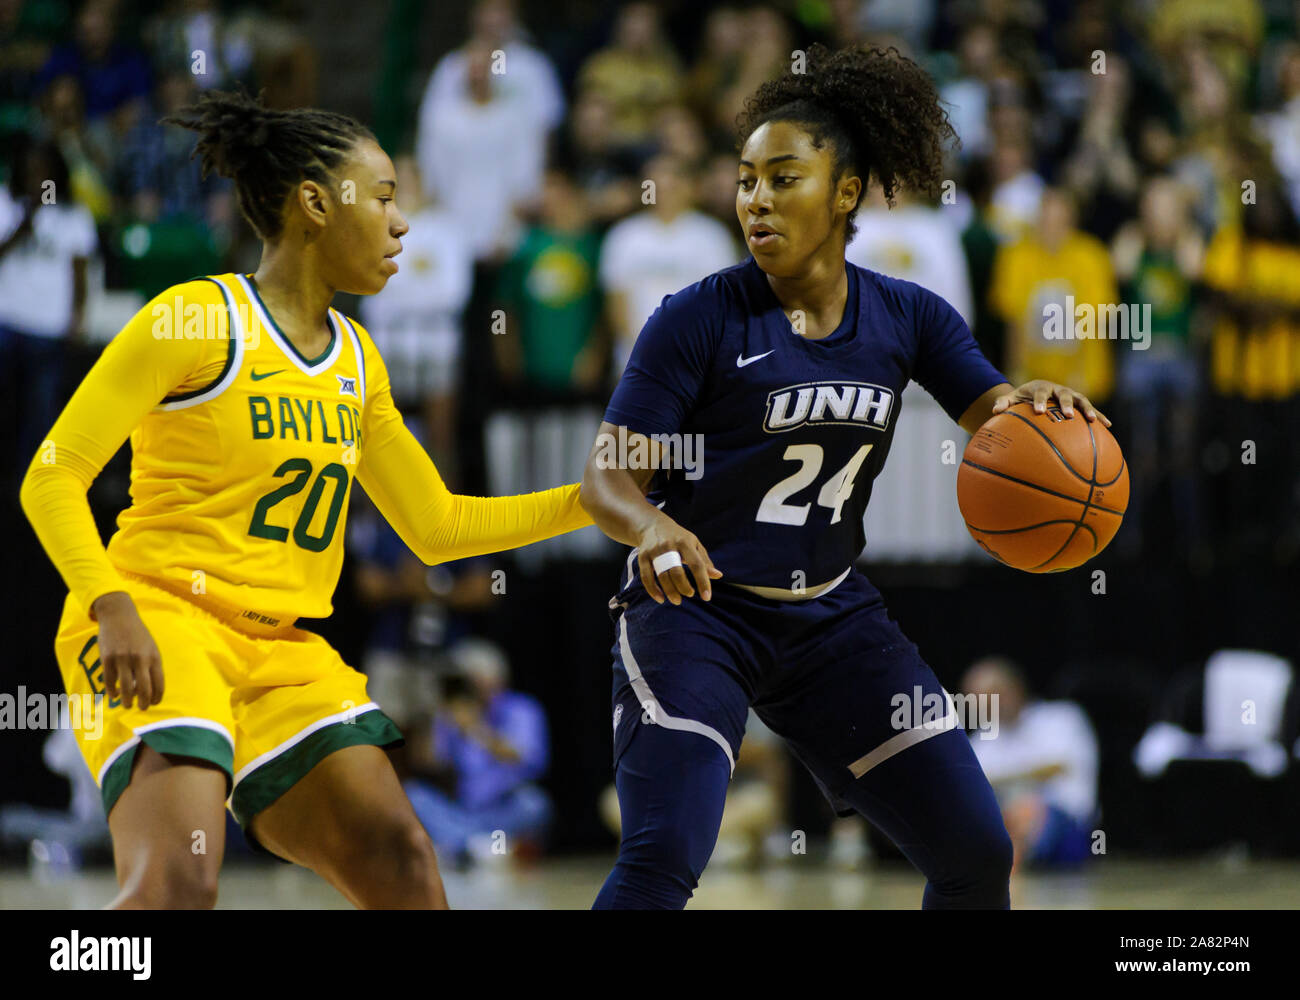 Waco, Texas, USA. 5th Nov, 2019. New Hampshire Wildcats guard Helena Delaruelle (24) dribbles the ball against Baylor Lady Bears guard Juicy Landrum (20) during the 1st half of the NCAA Women's Basketball game between New Hampshire Wildcats and the Baylor Bears at The Ferrell Center in Waco, Texas. Matthew Lynch/CSM/Alamy Live News Stock Photo